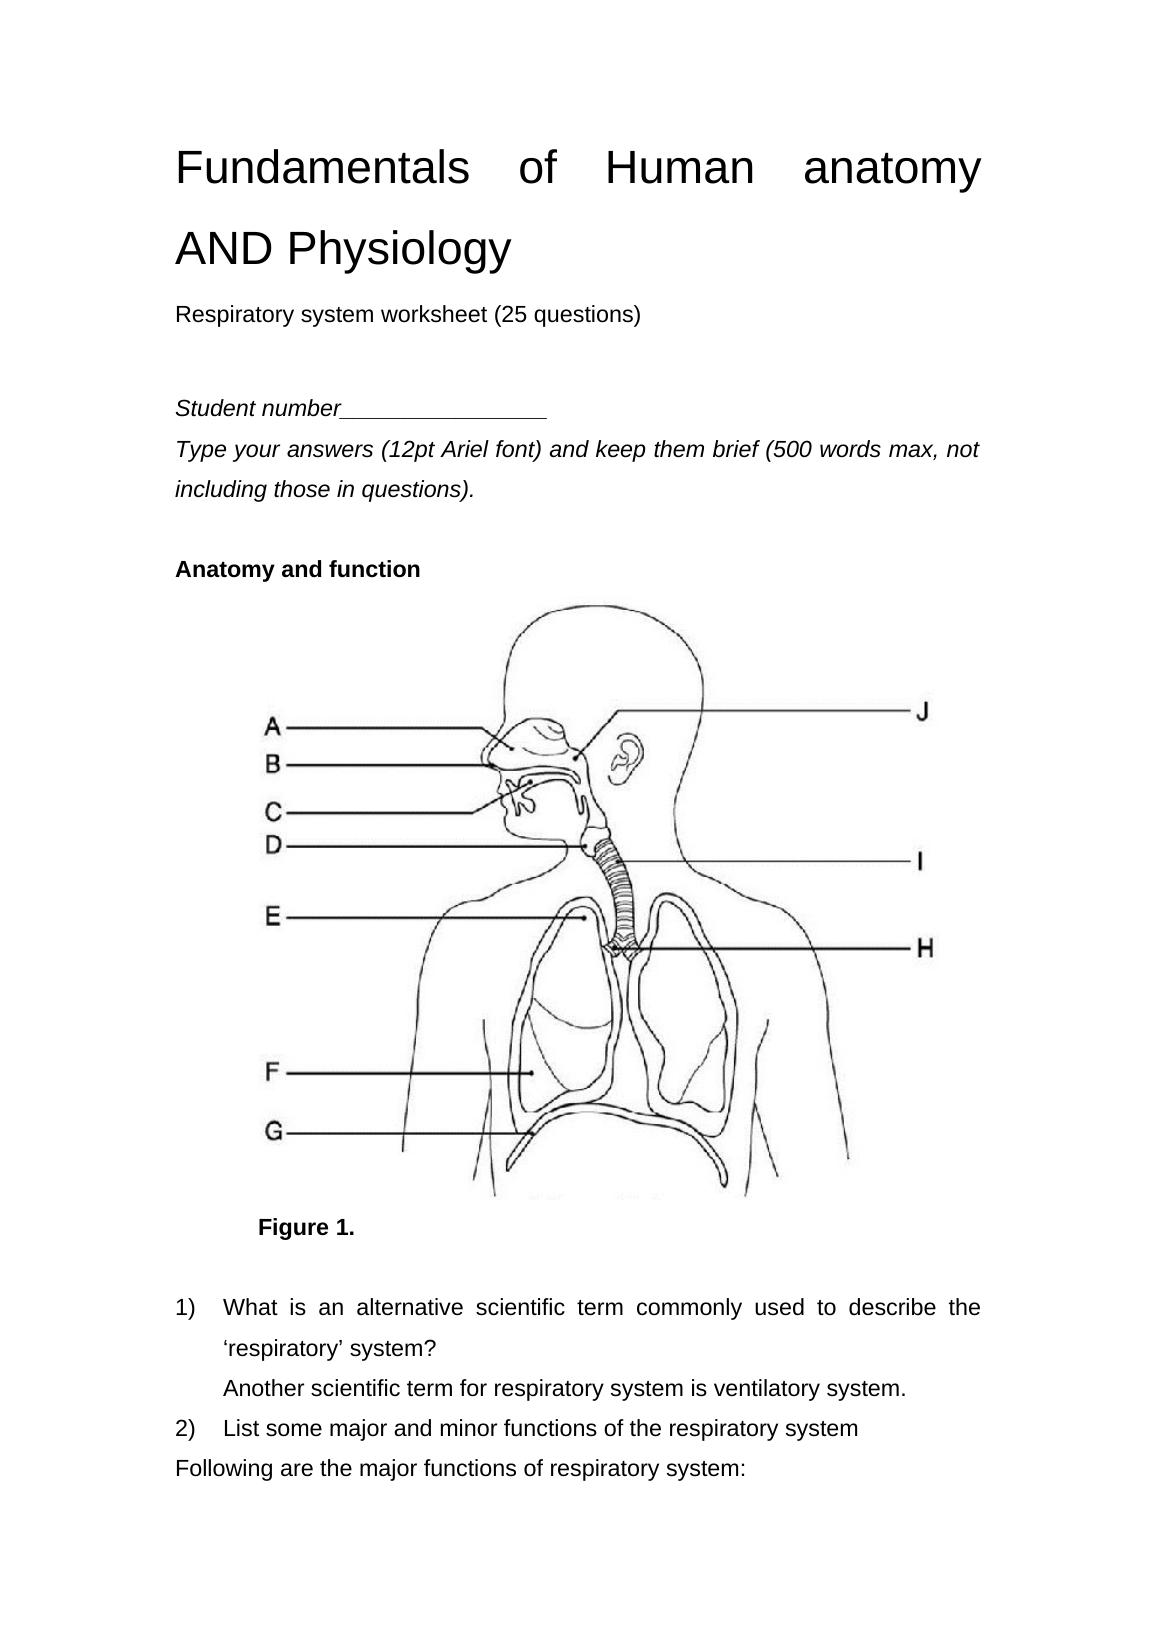 Fundamentals of Human Anatomy and Physiology: Respiratory System Worksheet_1